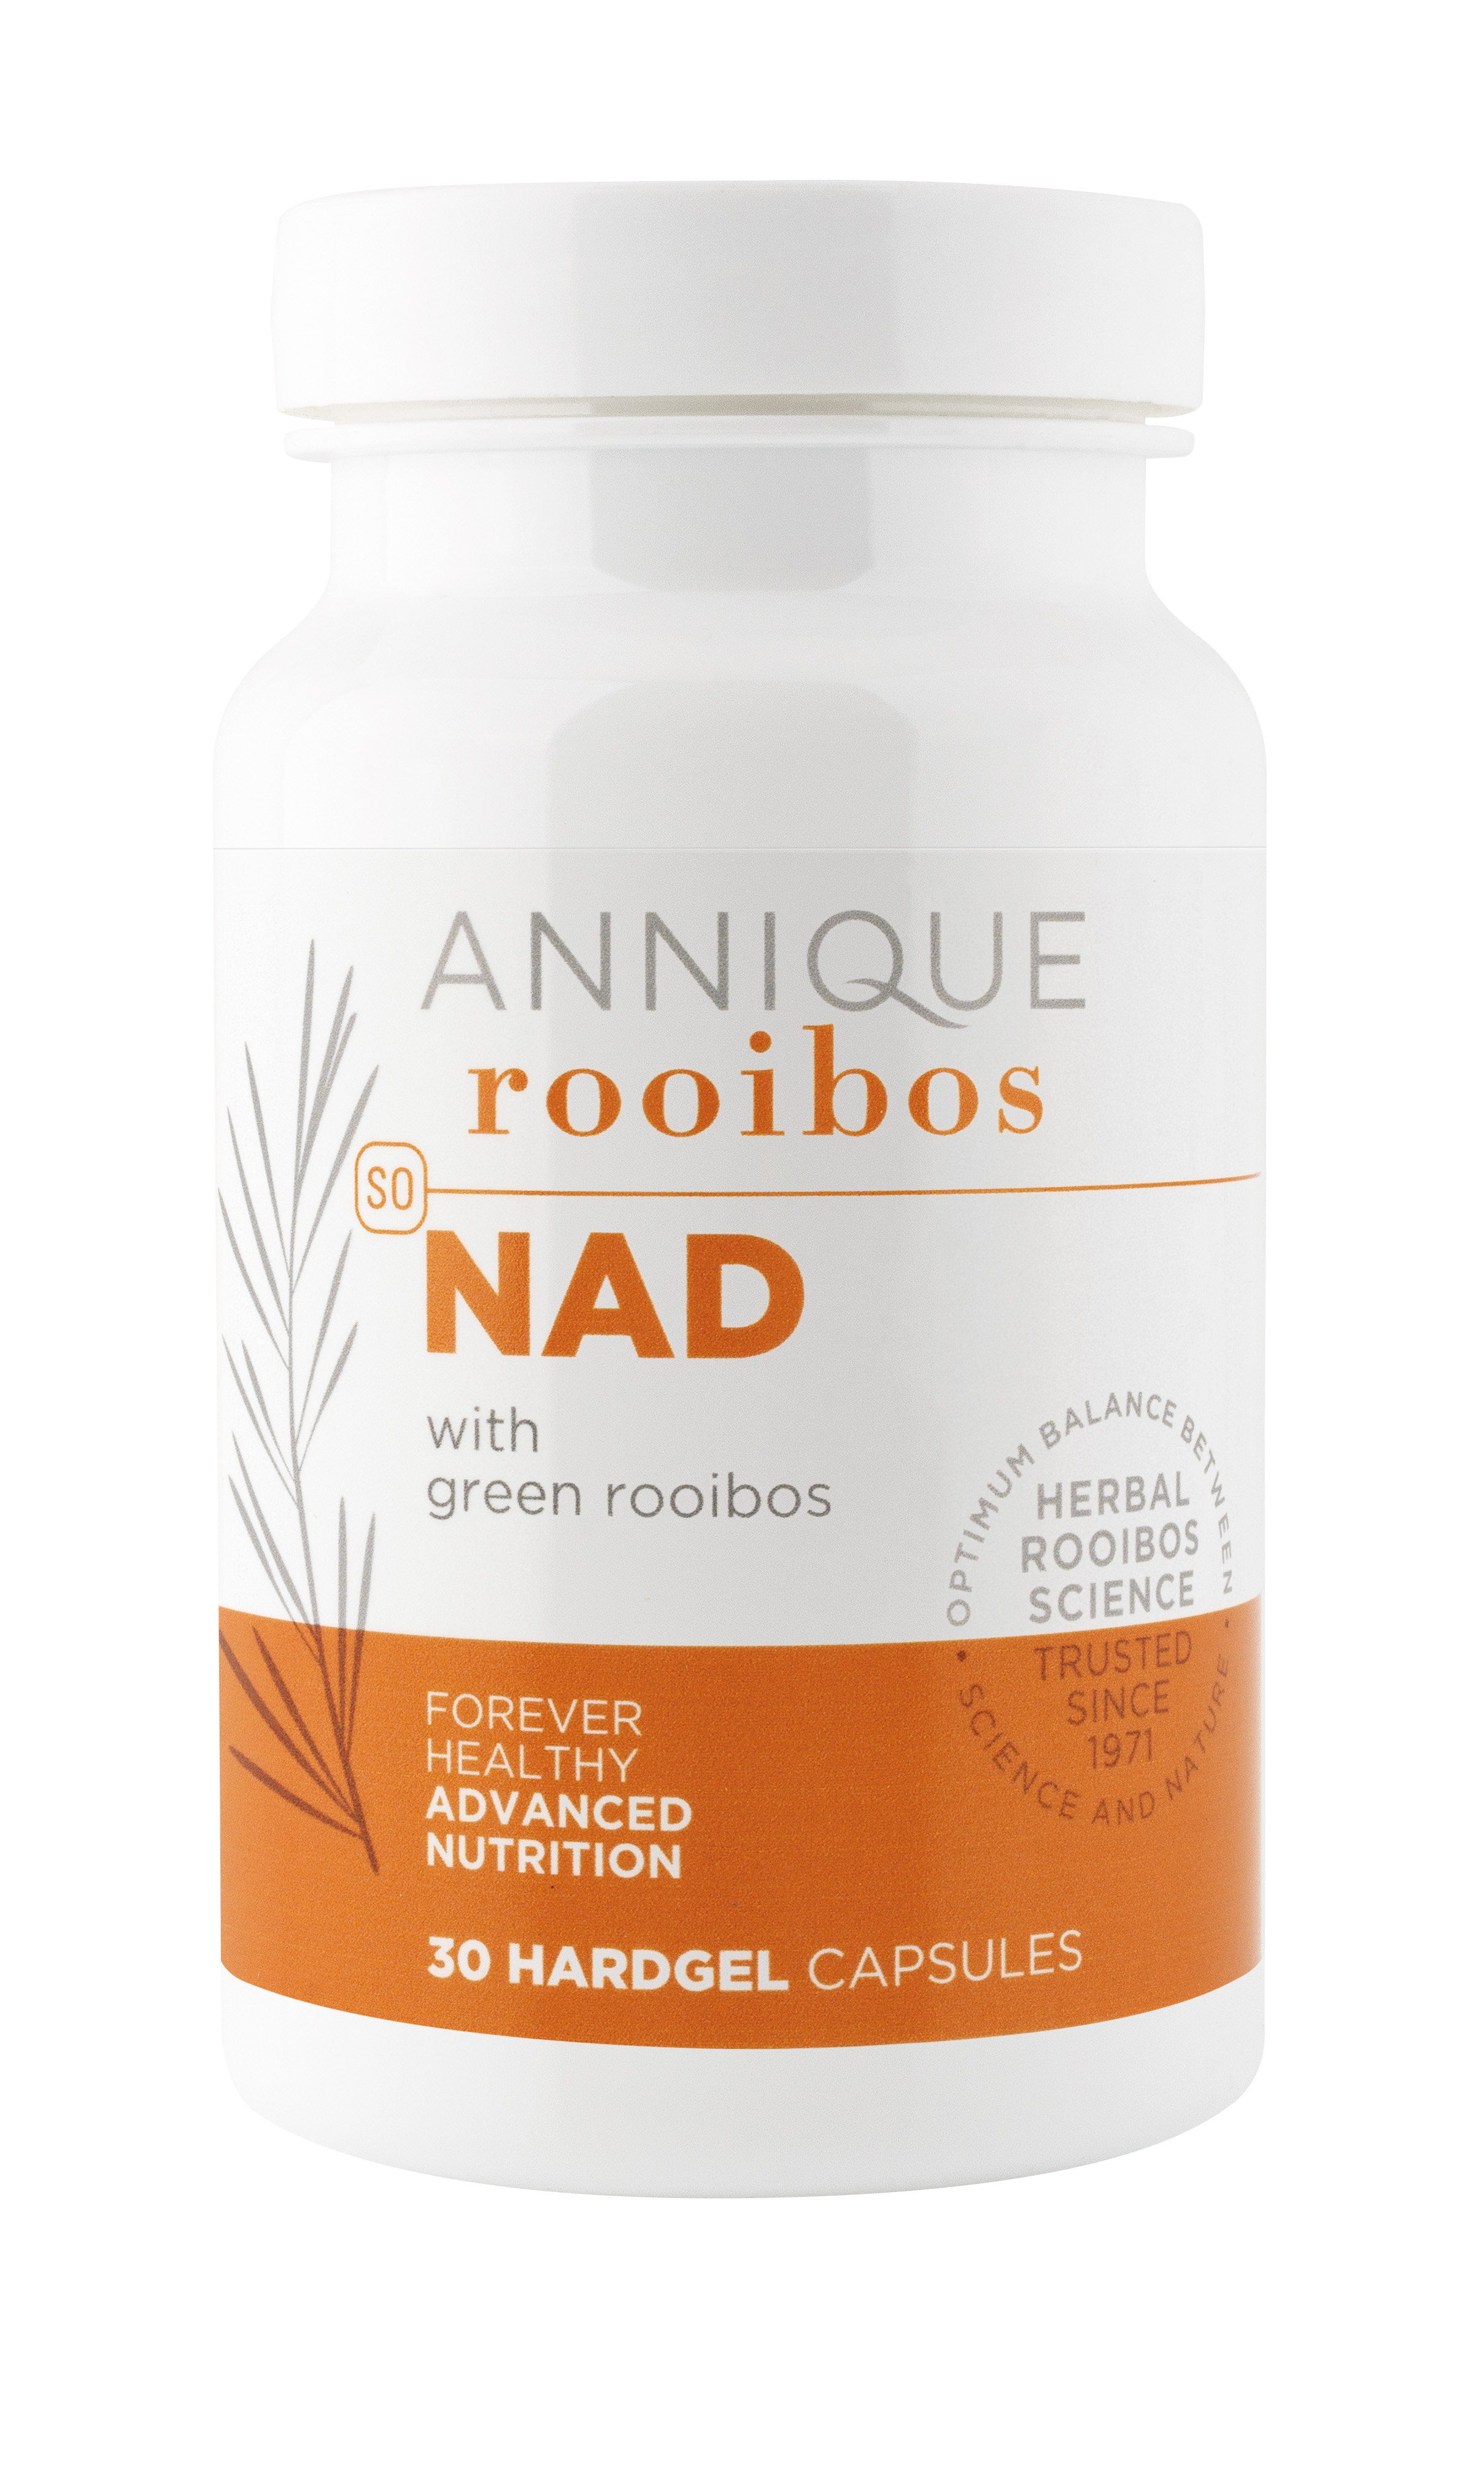 NAD and Green Rooibos – 30 Hardgel Capsules